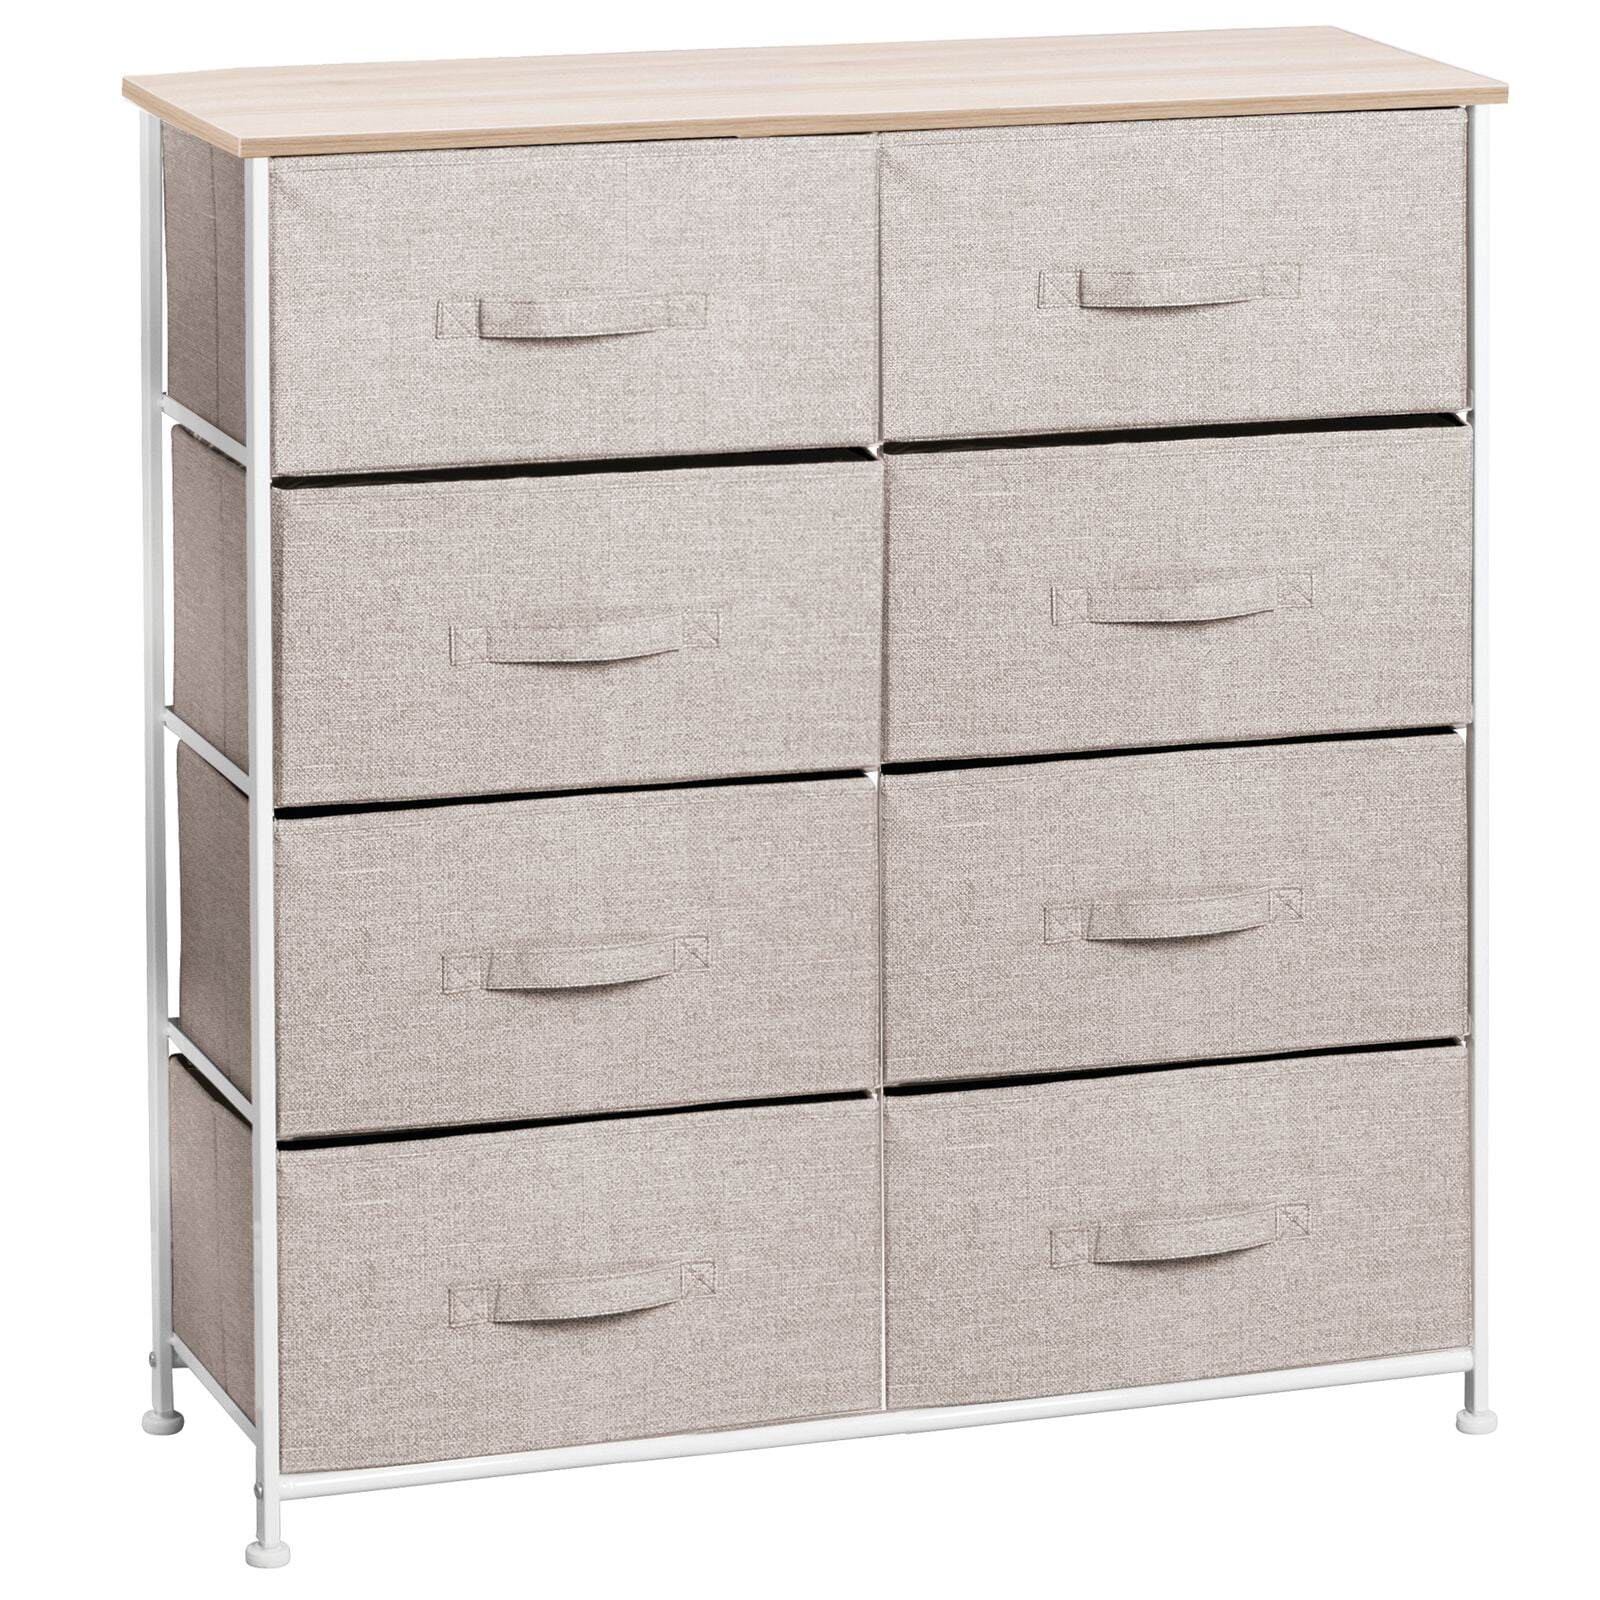 8 Drawer Narrow Lingerie Storage Dresser Chest Furniture Tall Space Saver Cart for sale online 